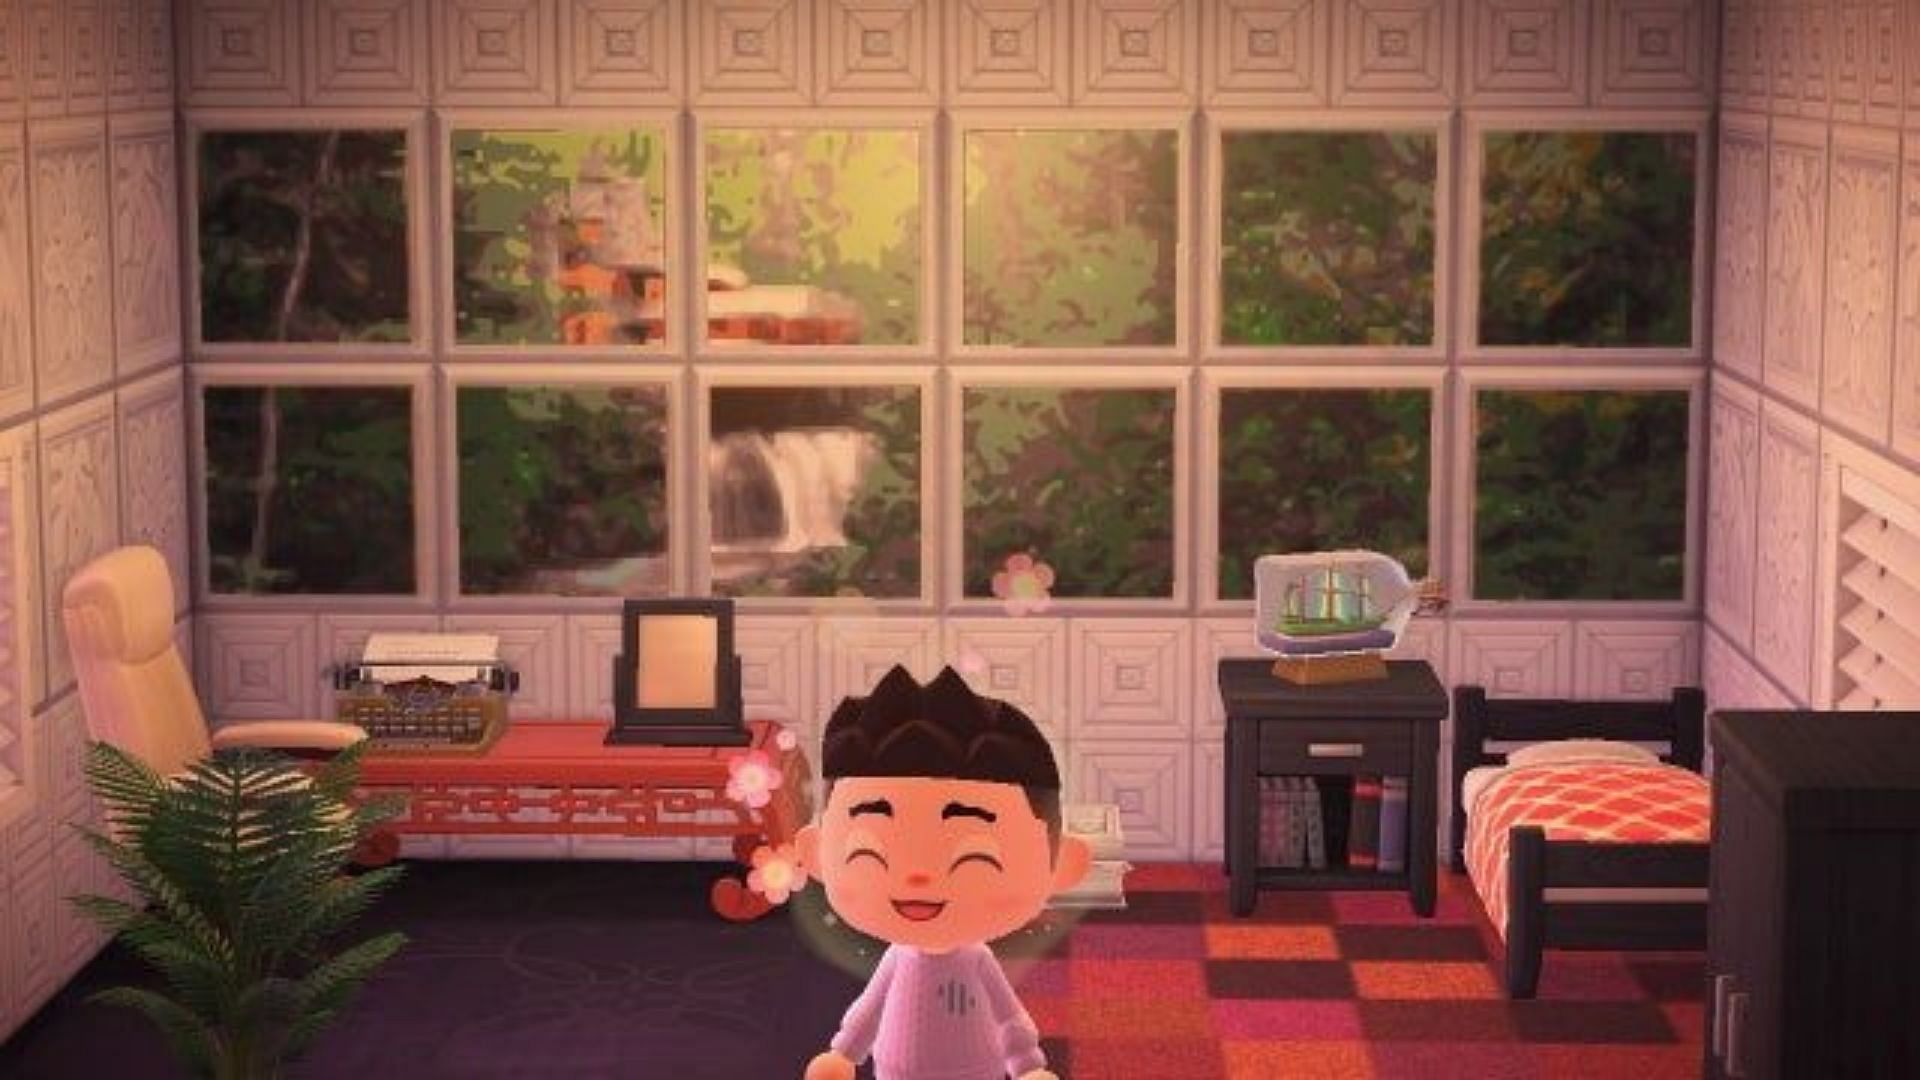 How to design an animated window in Animal Crossing: New Horizons